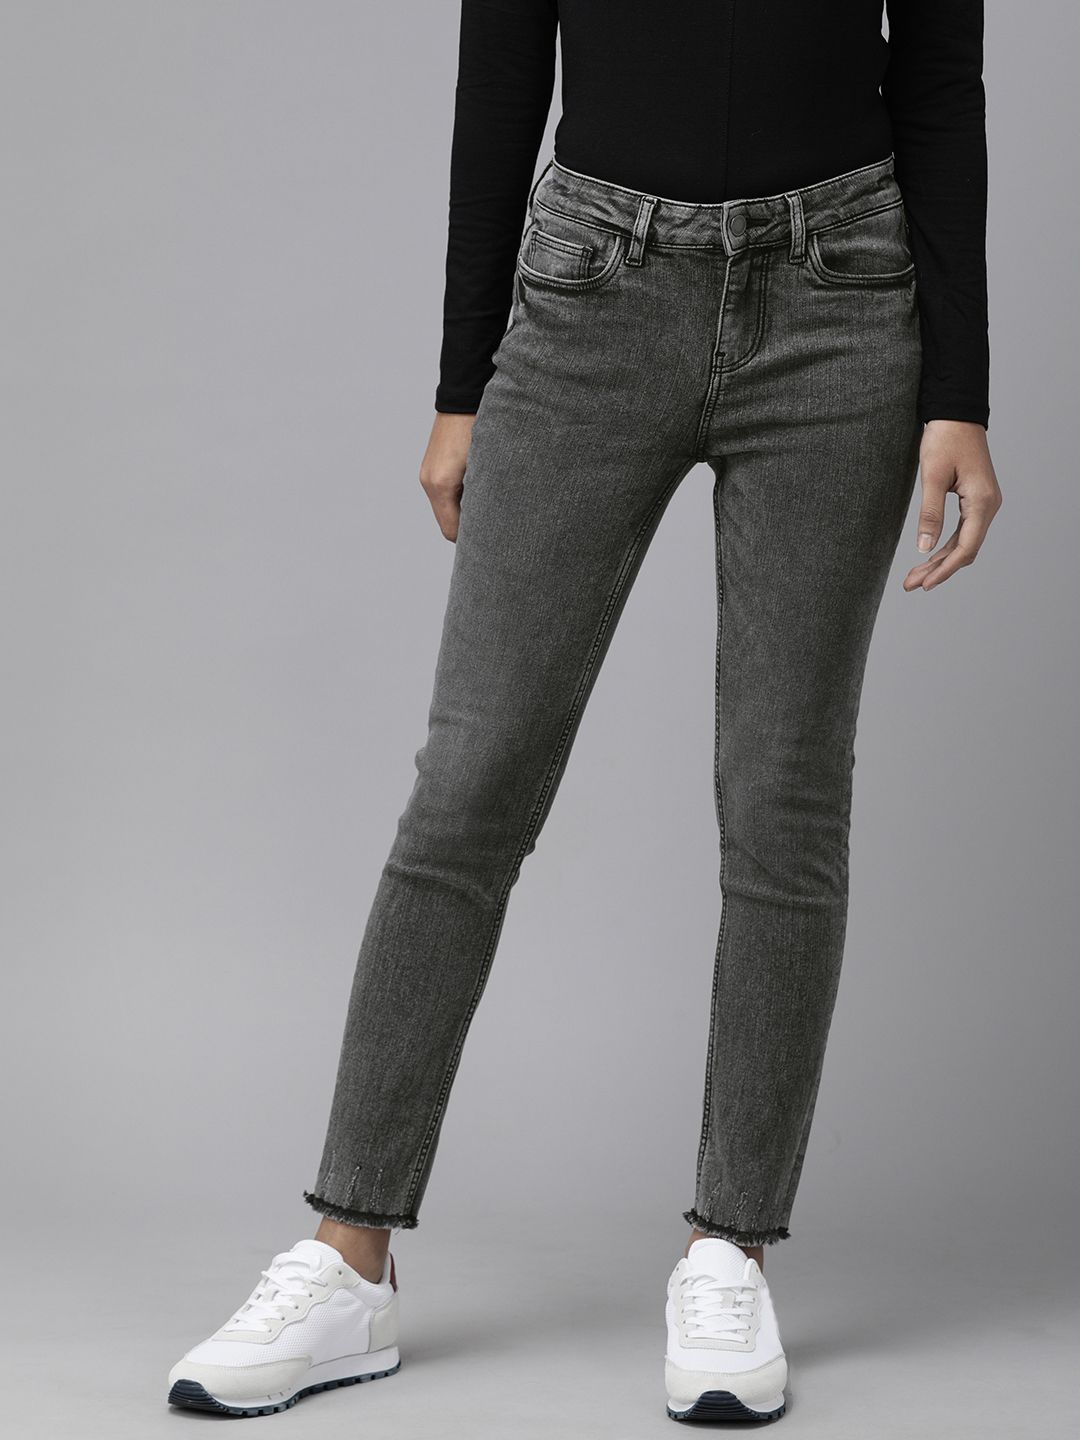 Vero Moda Women Black Skinny Fit Light Fade Mid Rise Stretchable Jeans Price in India